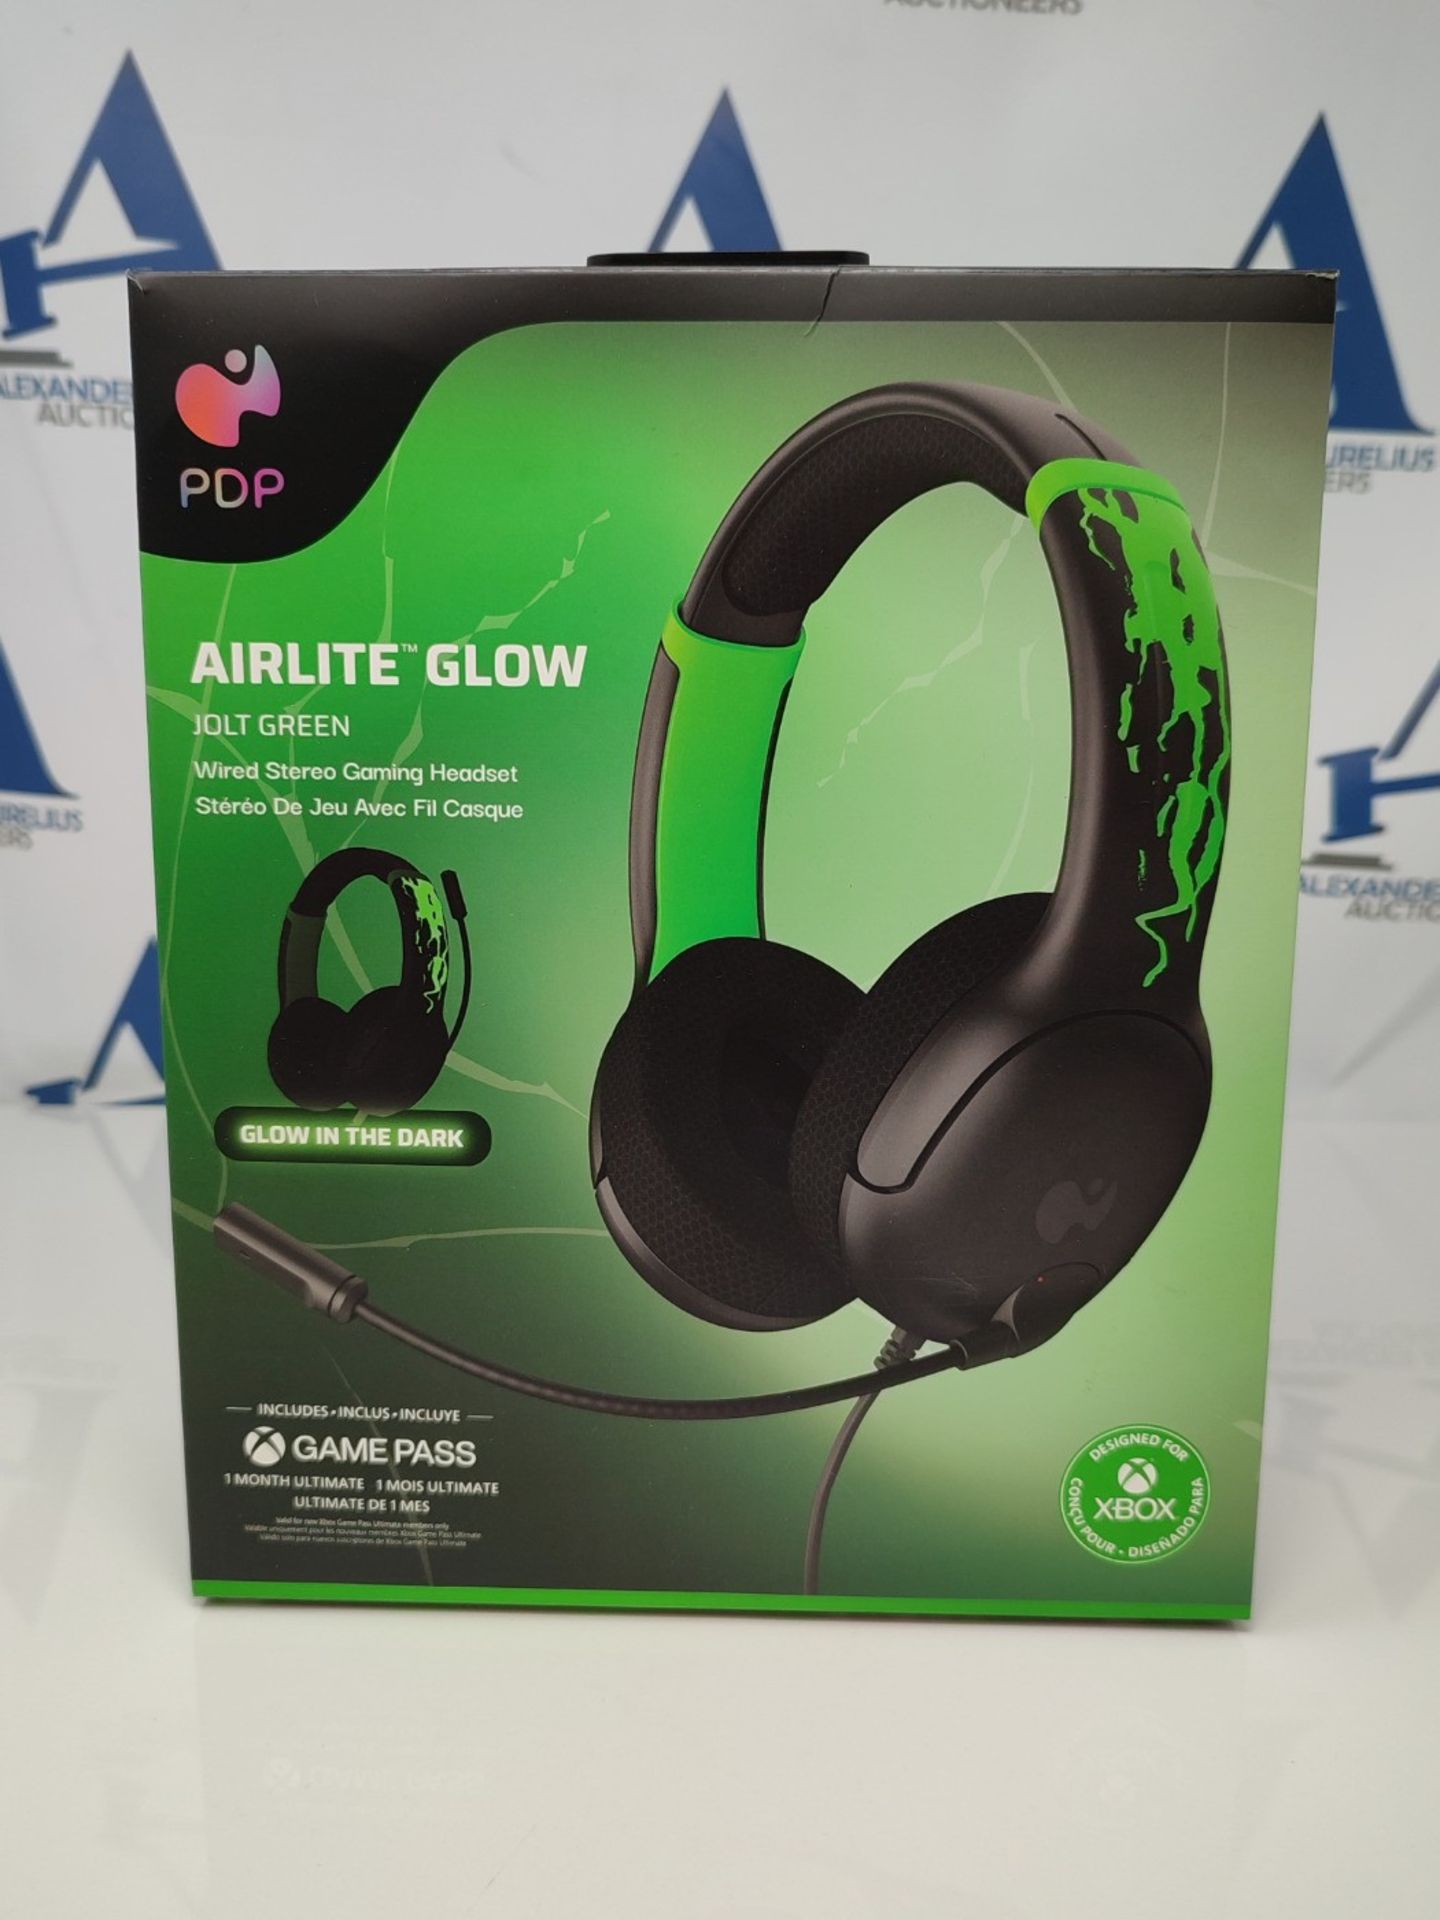 PDP Xbox AIRLITE Wired Headset Jolt Green - Image 2 of 3